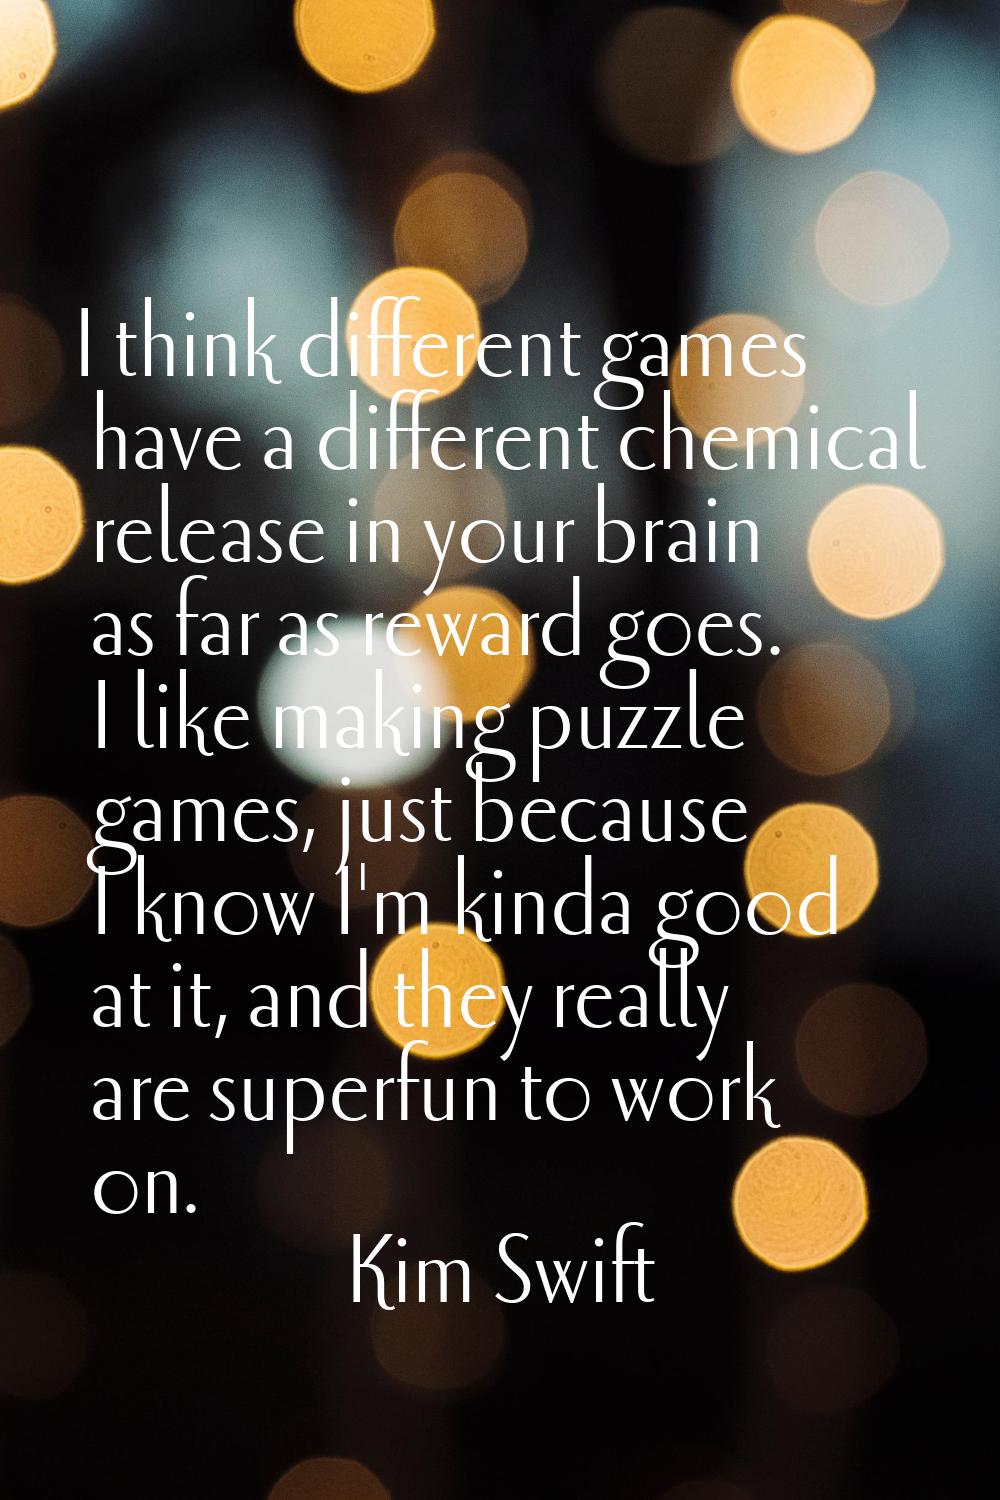 I think different games have a different chemical release in your brain as far as reward goes. I li